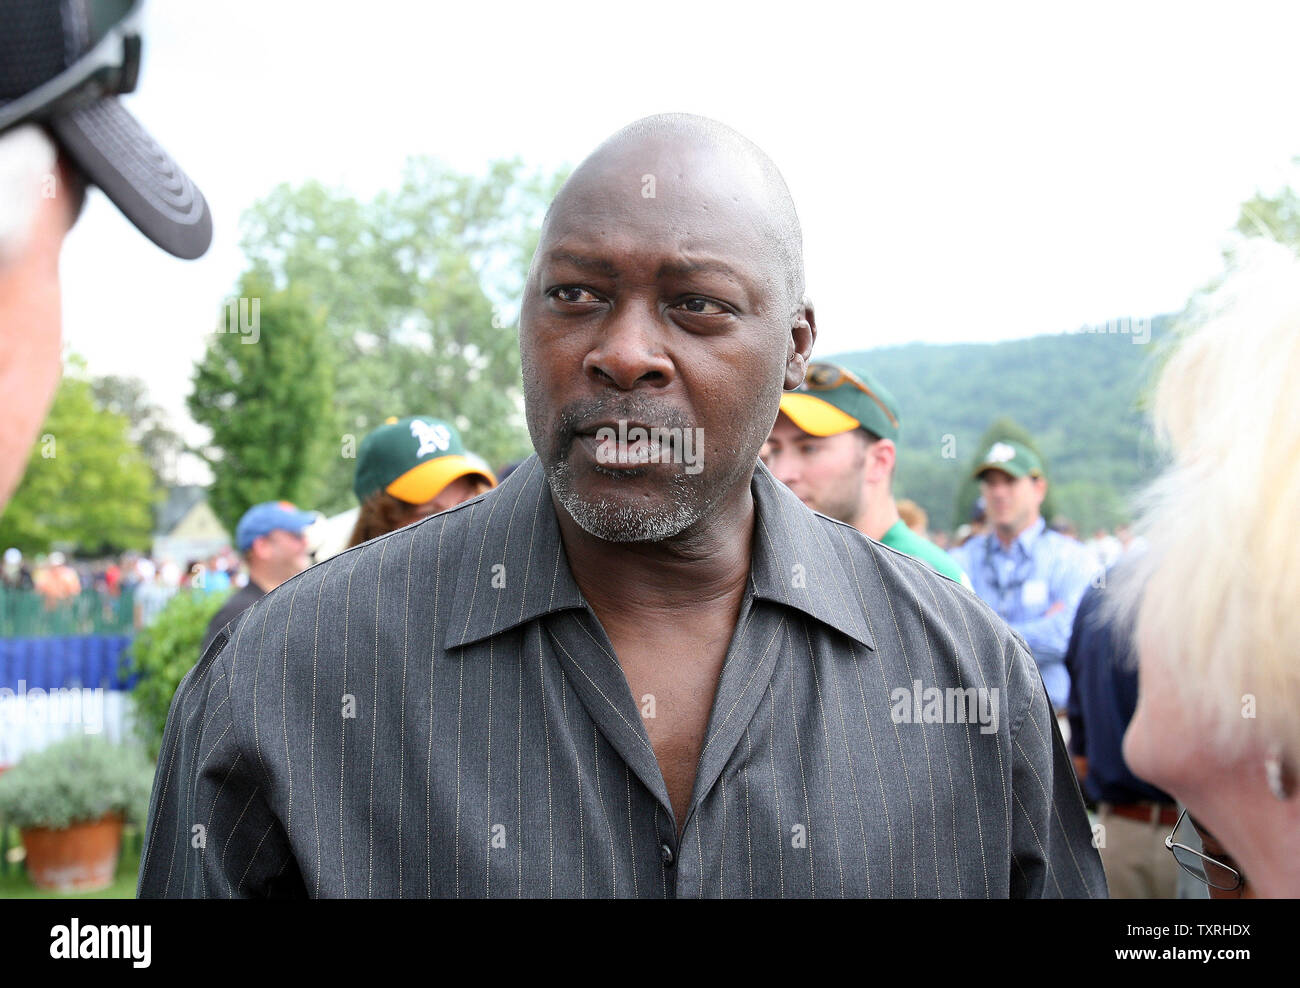 Former baseball player Dave Stewart talks with friends before the induction  ceremonies for National Baseball Hall of Fame inductees Rickey Henderson  and Jim Rice in Cooperstown, New York on July 26, 2009. (